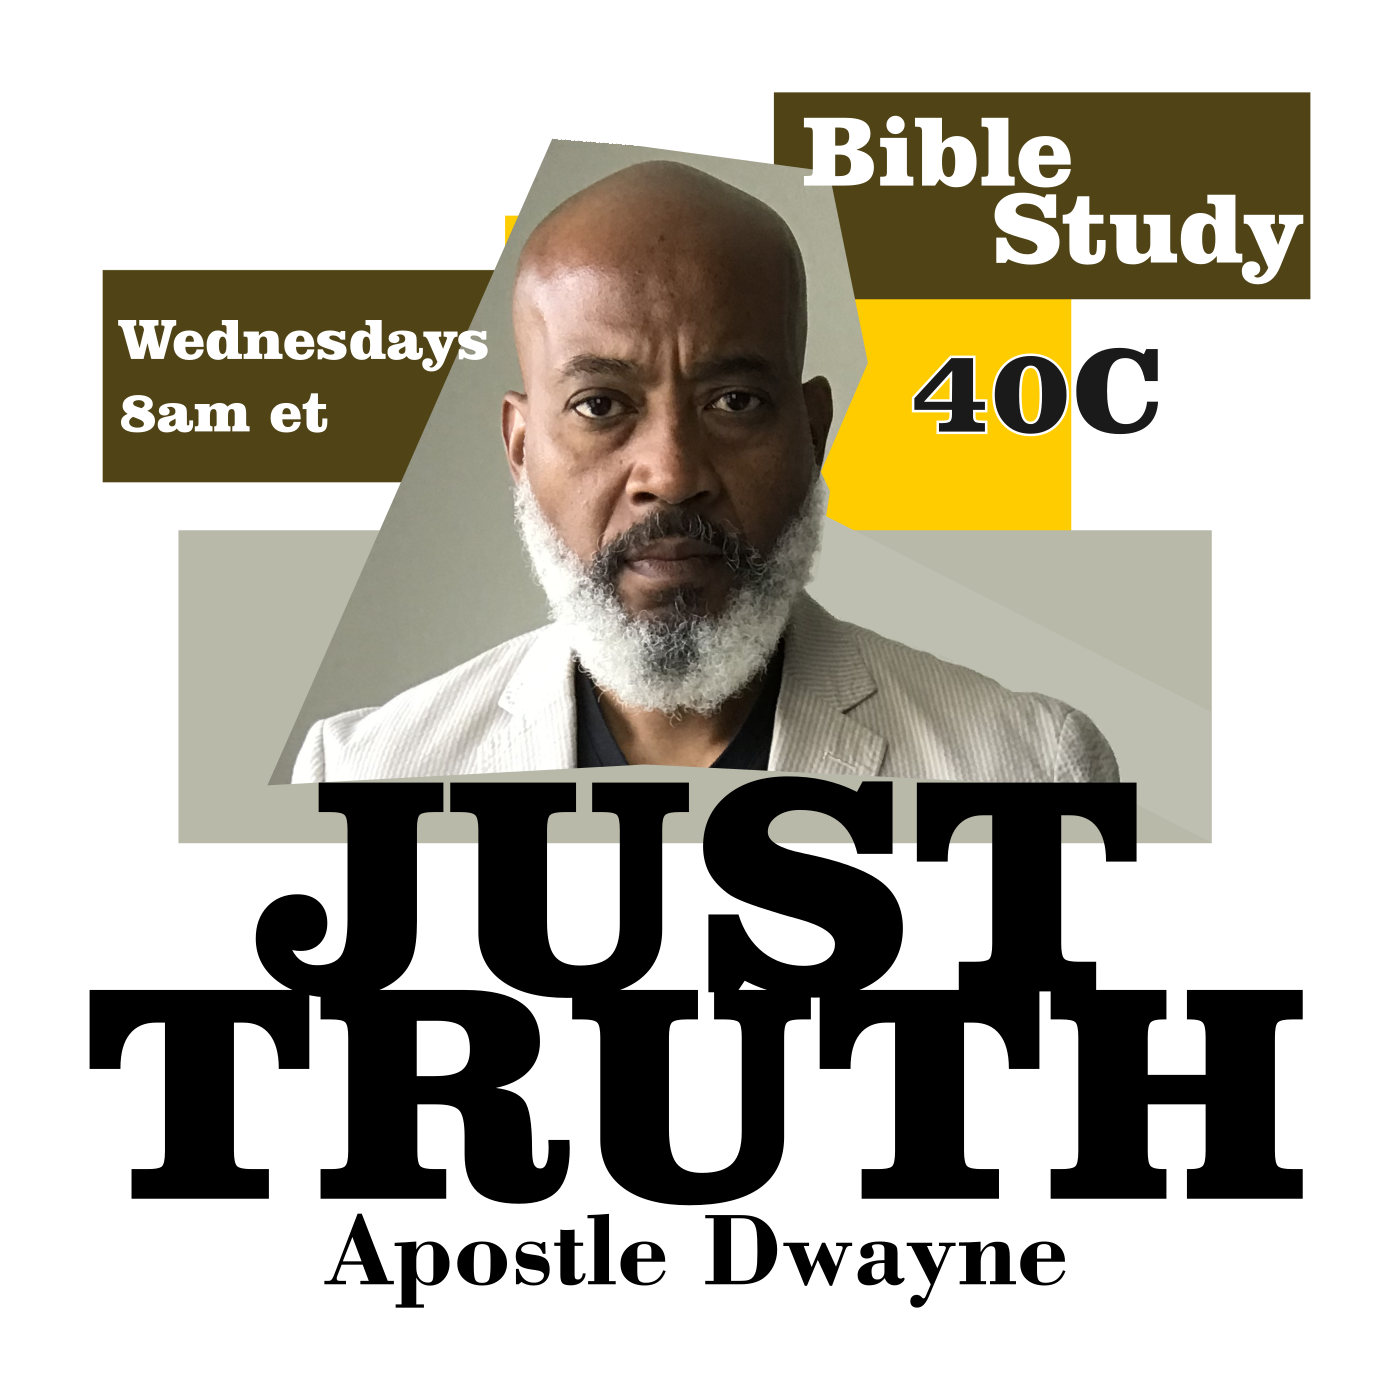 Show artwork for Bible Study with Apostle Dwayne